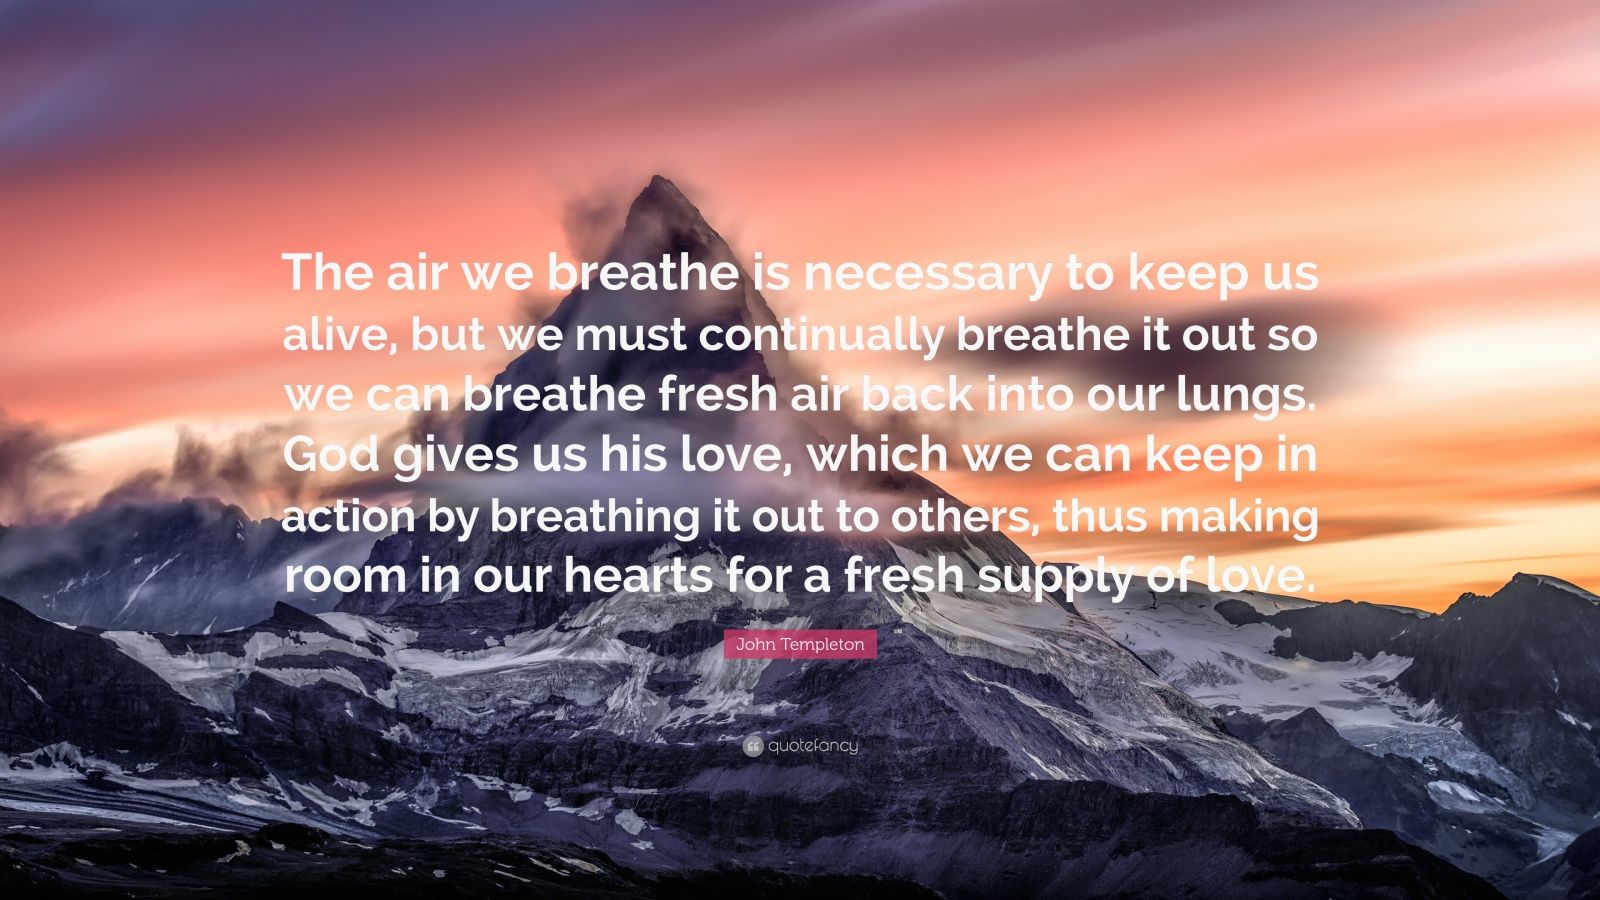 John Templeton Quote “The air we breathe is necessary to